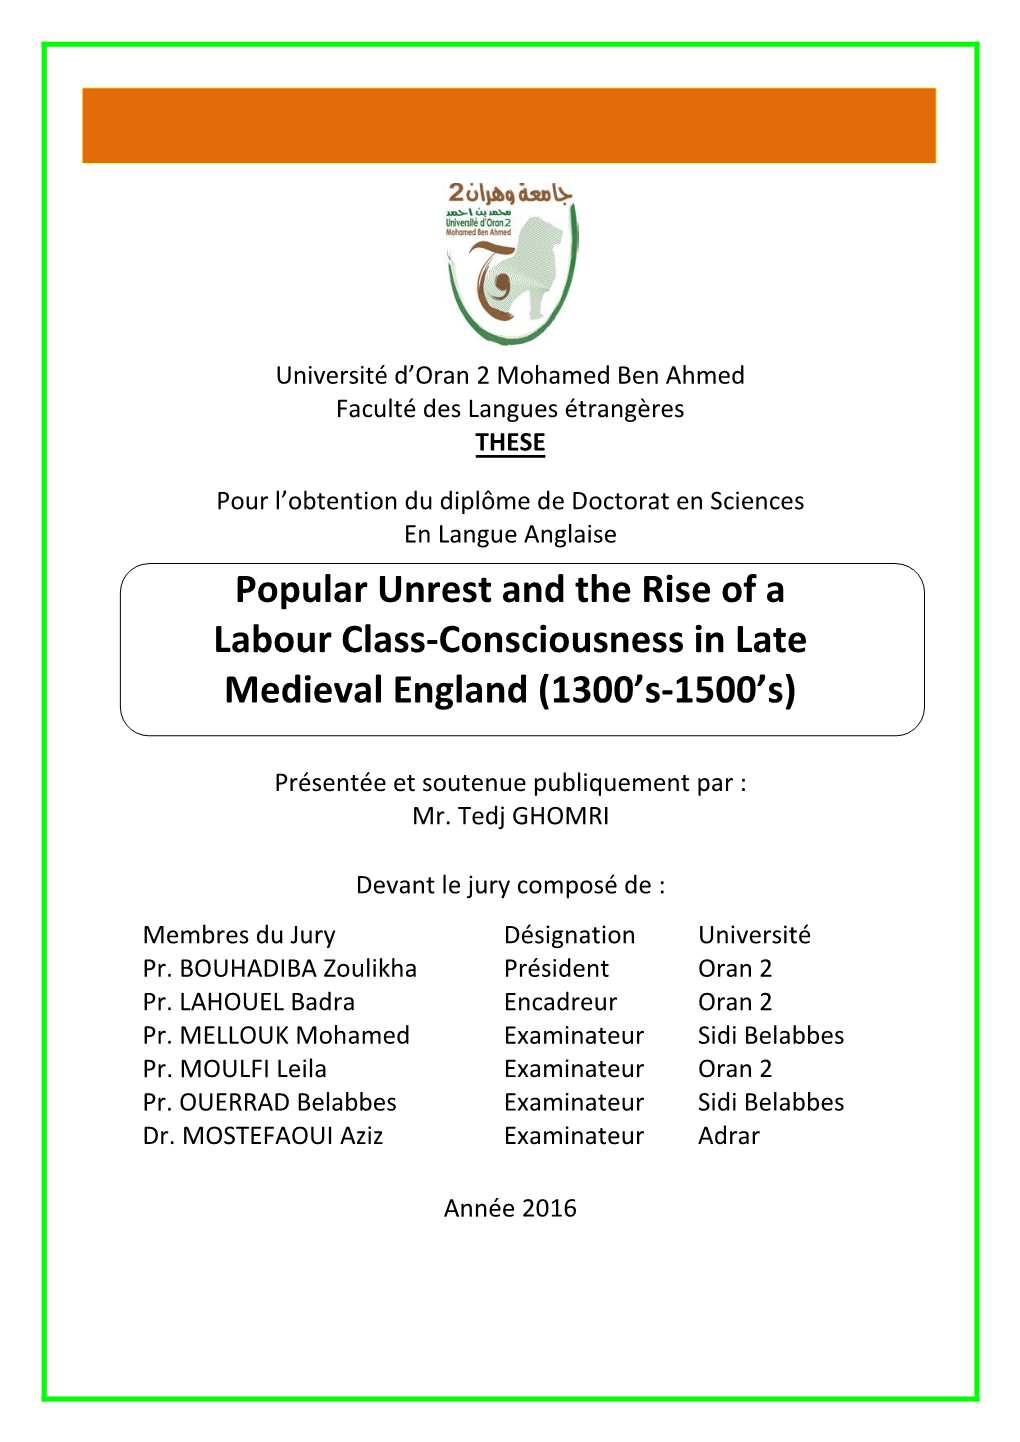 Popular Unrest and the Rise of a Labour Class-Consciousness in Late Medieval England (1300’S-1500’S)